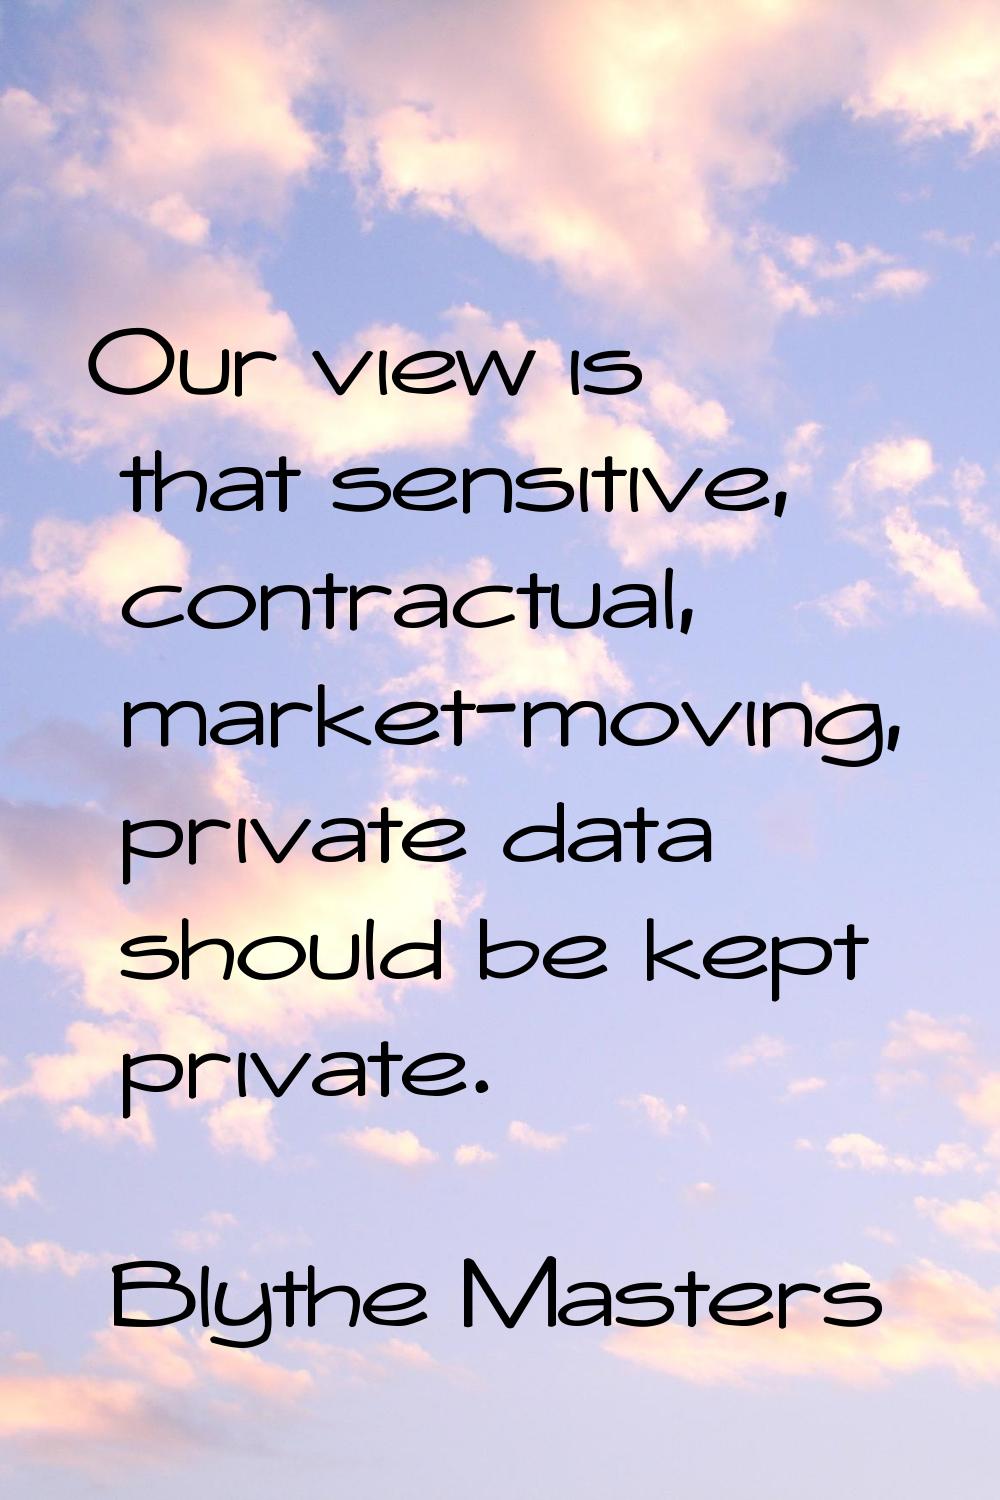 Our view is that sensitive, contractual, market-moving, private data should be kept private.